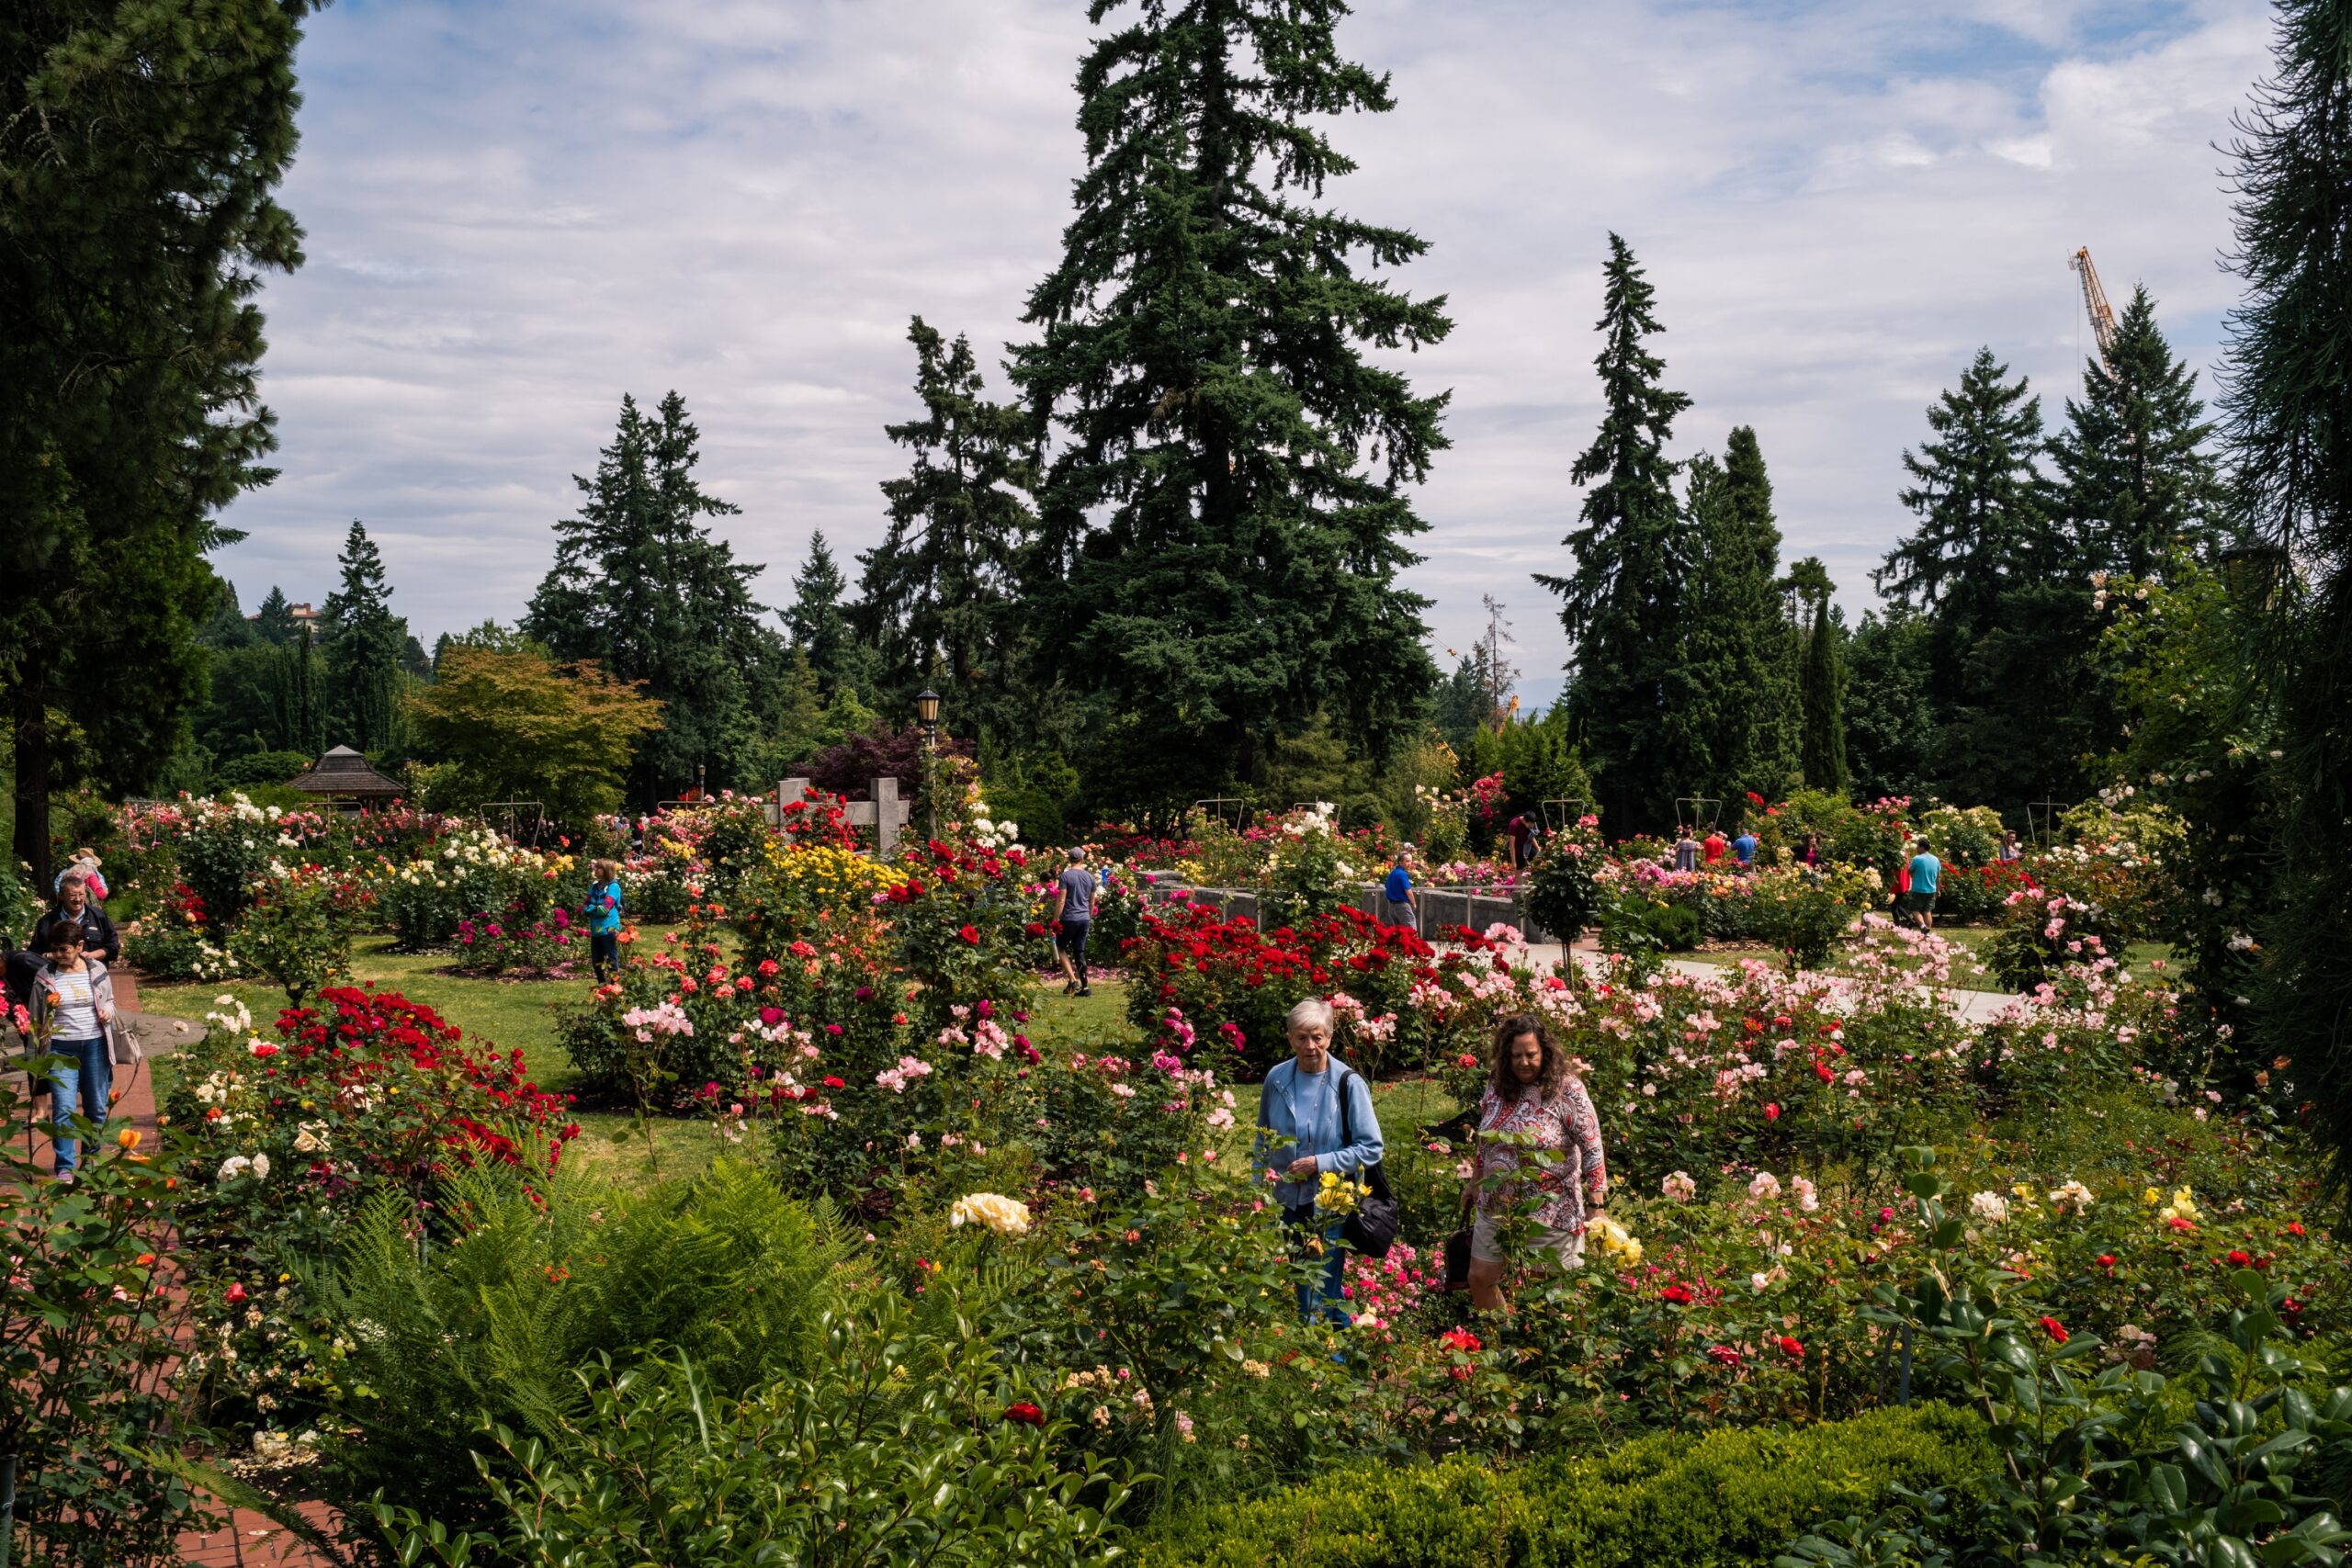 International Rose Garden Is Located Right In Washington Park. There Are Thousand Different Types Of Roses To See And Great Place To Have A Picnic In The Summer.